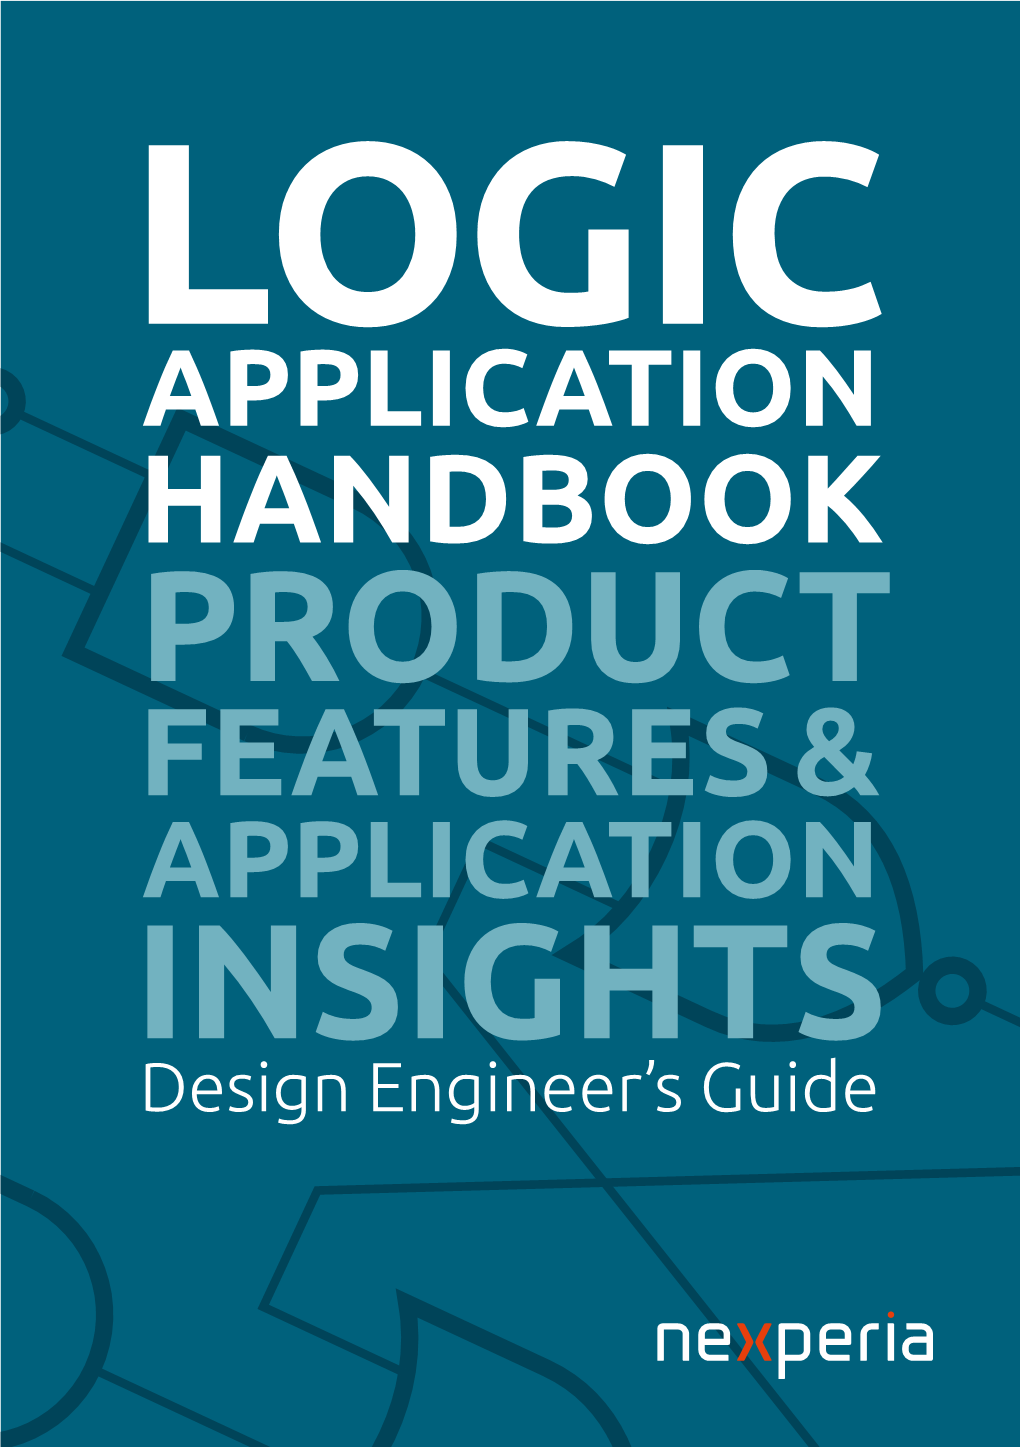 APPLICATION HANDBOOK PRODUCT FEATURES & APPLICATION INSIGHTS Design Engineer’S Guide Logic Application Handbook Product Features and Application Insights